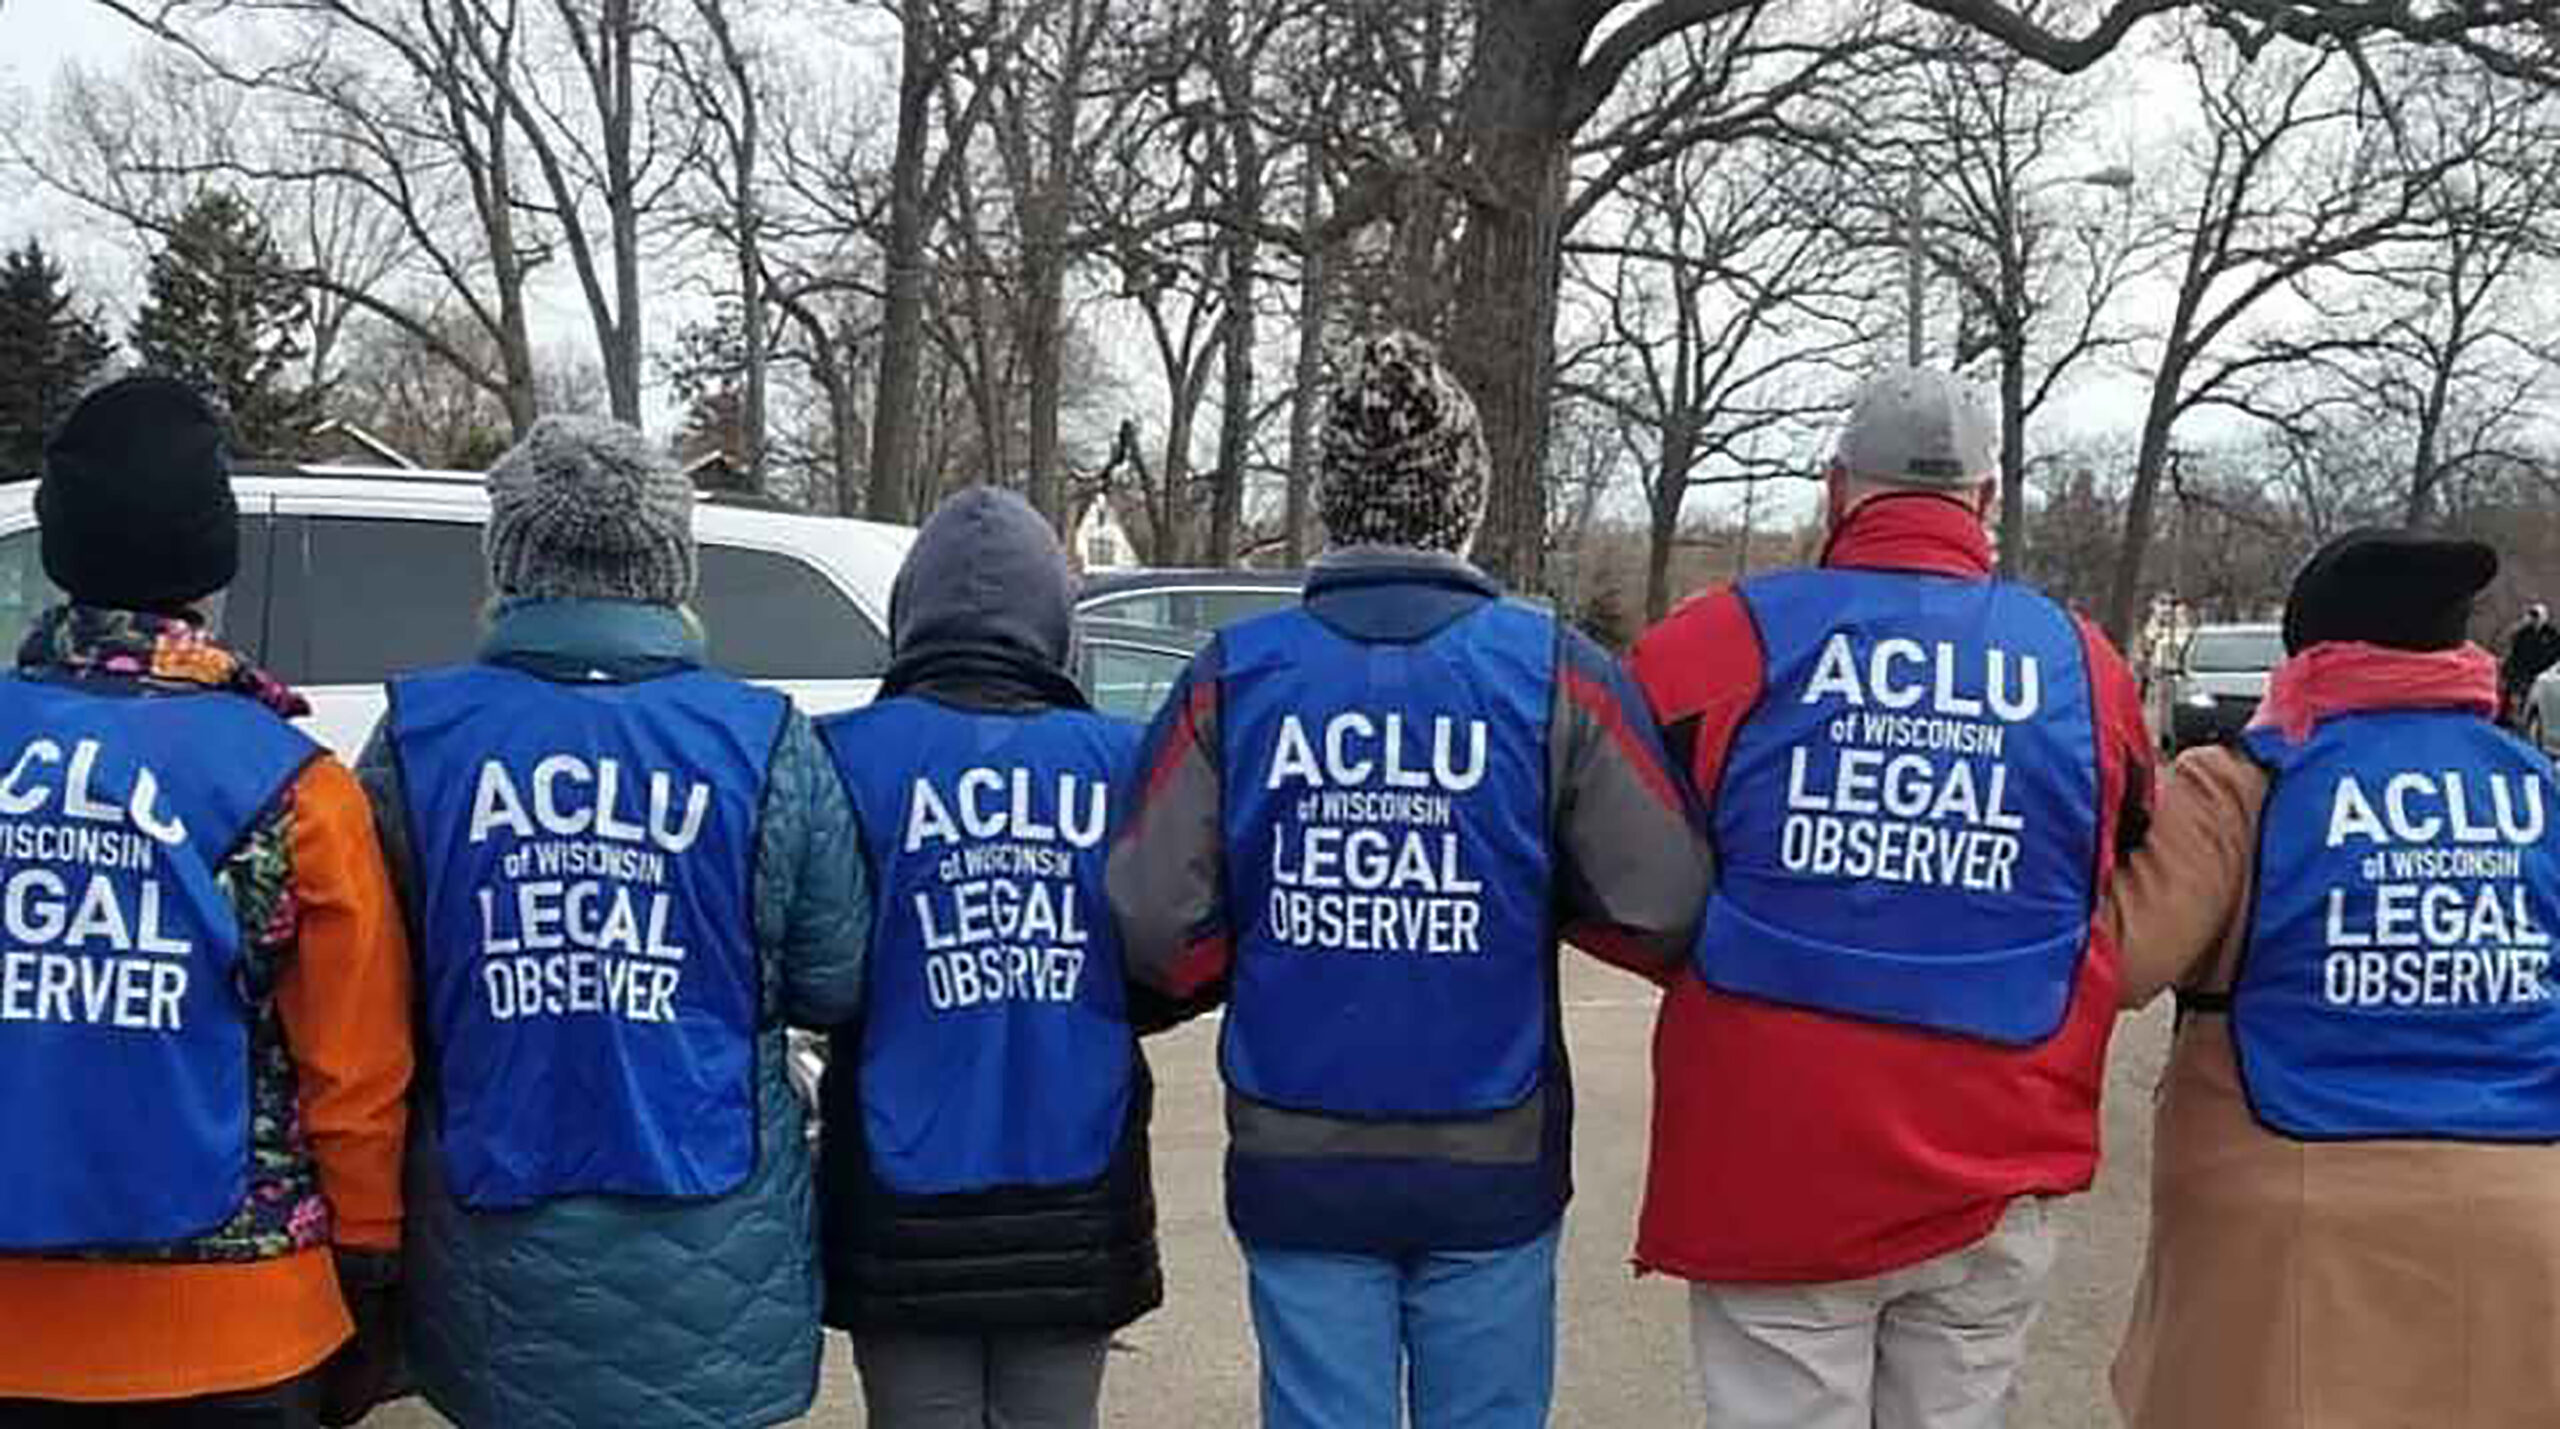 Head of Wisconsin ACLU says she’s not a fan of cancel culture, calls banning topics ‘unacceptable’